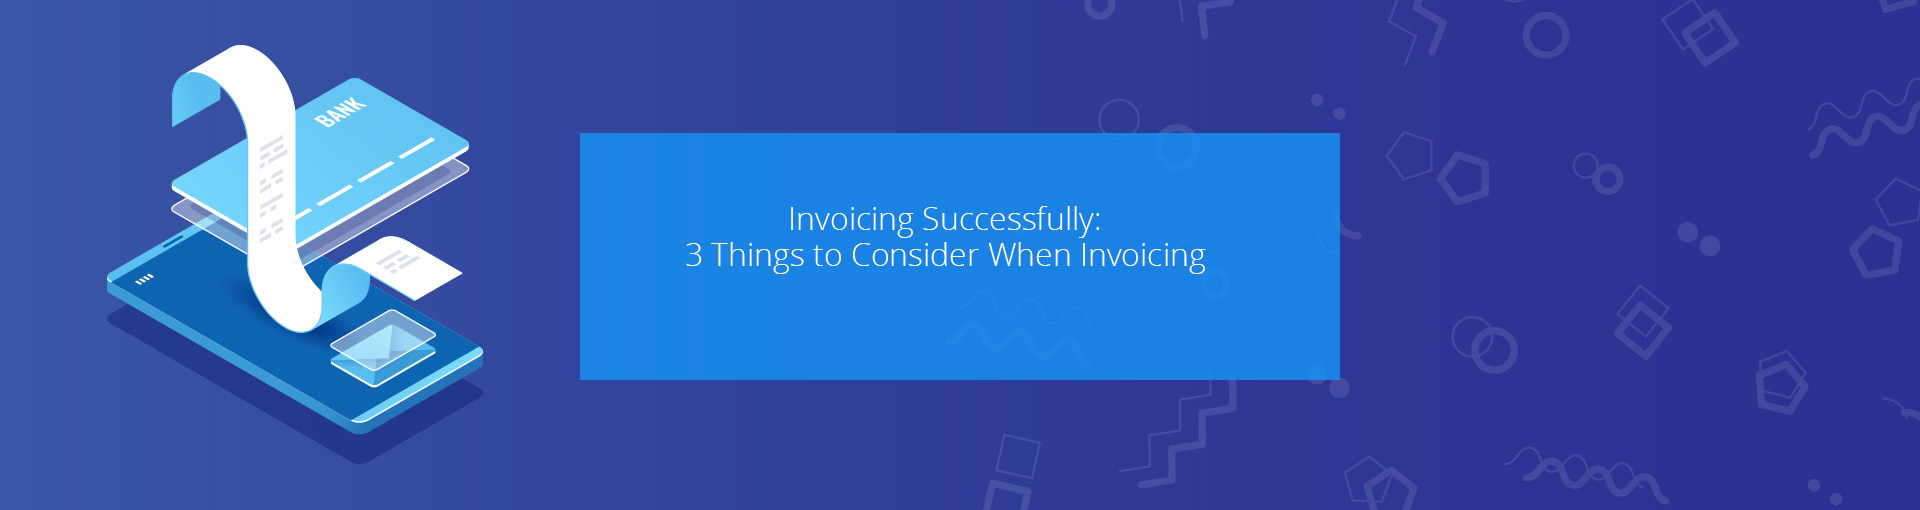 Invoicing Successfully: 3 Things to Consider When Invoicing Featured Image